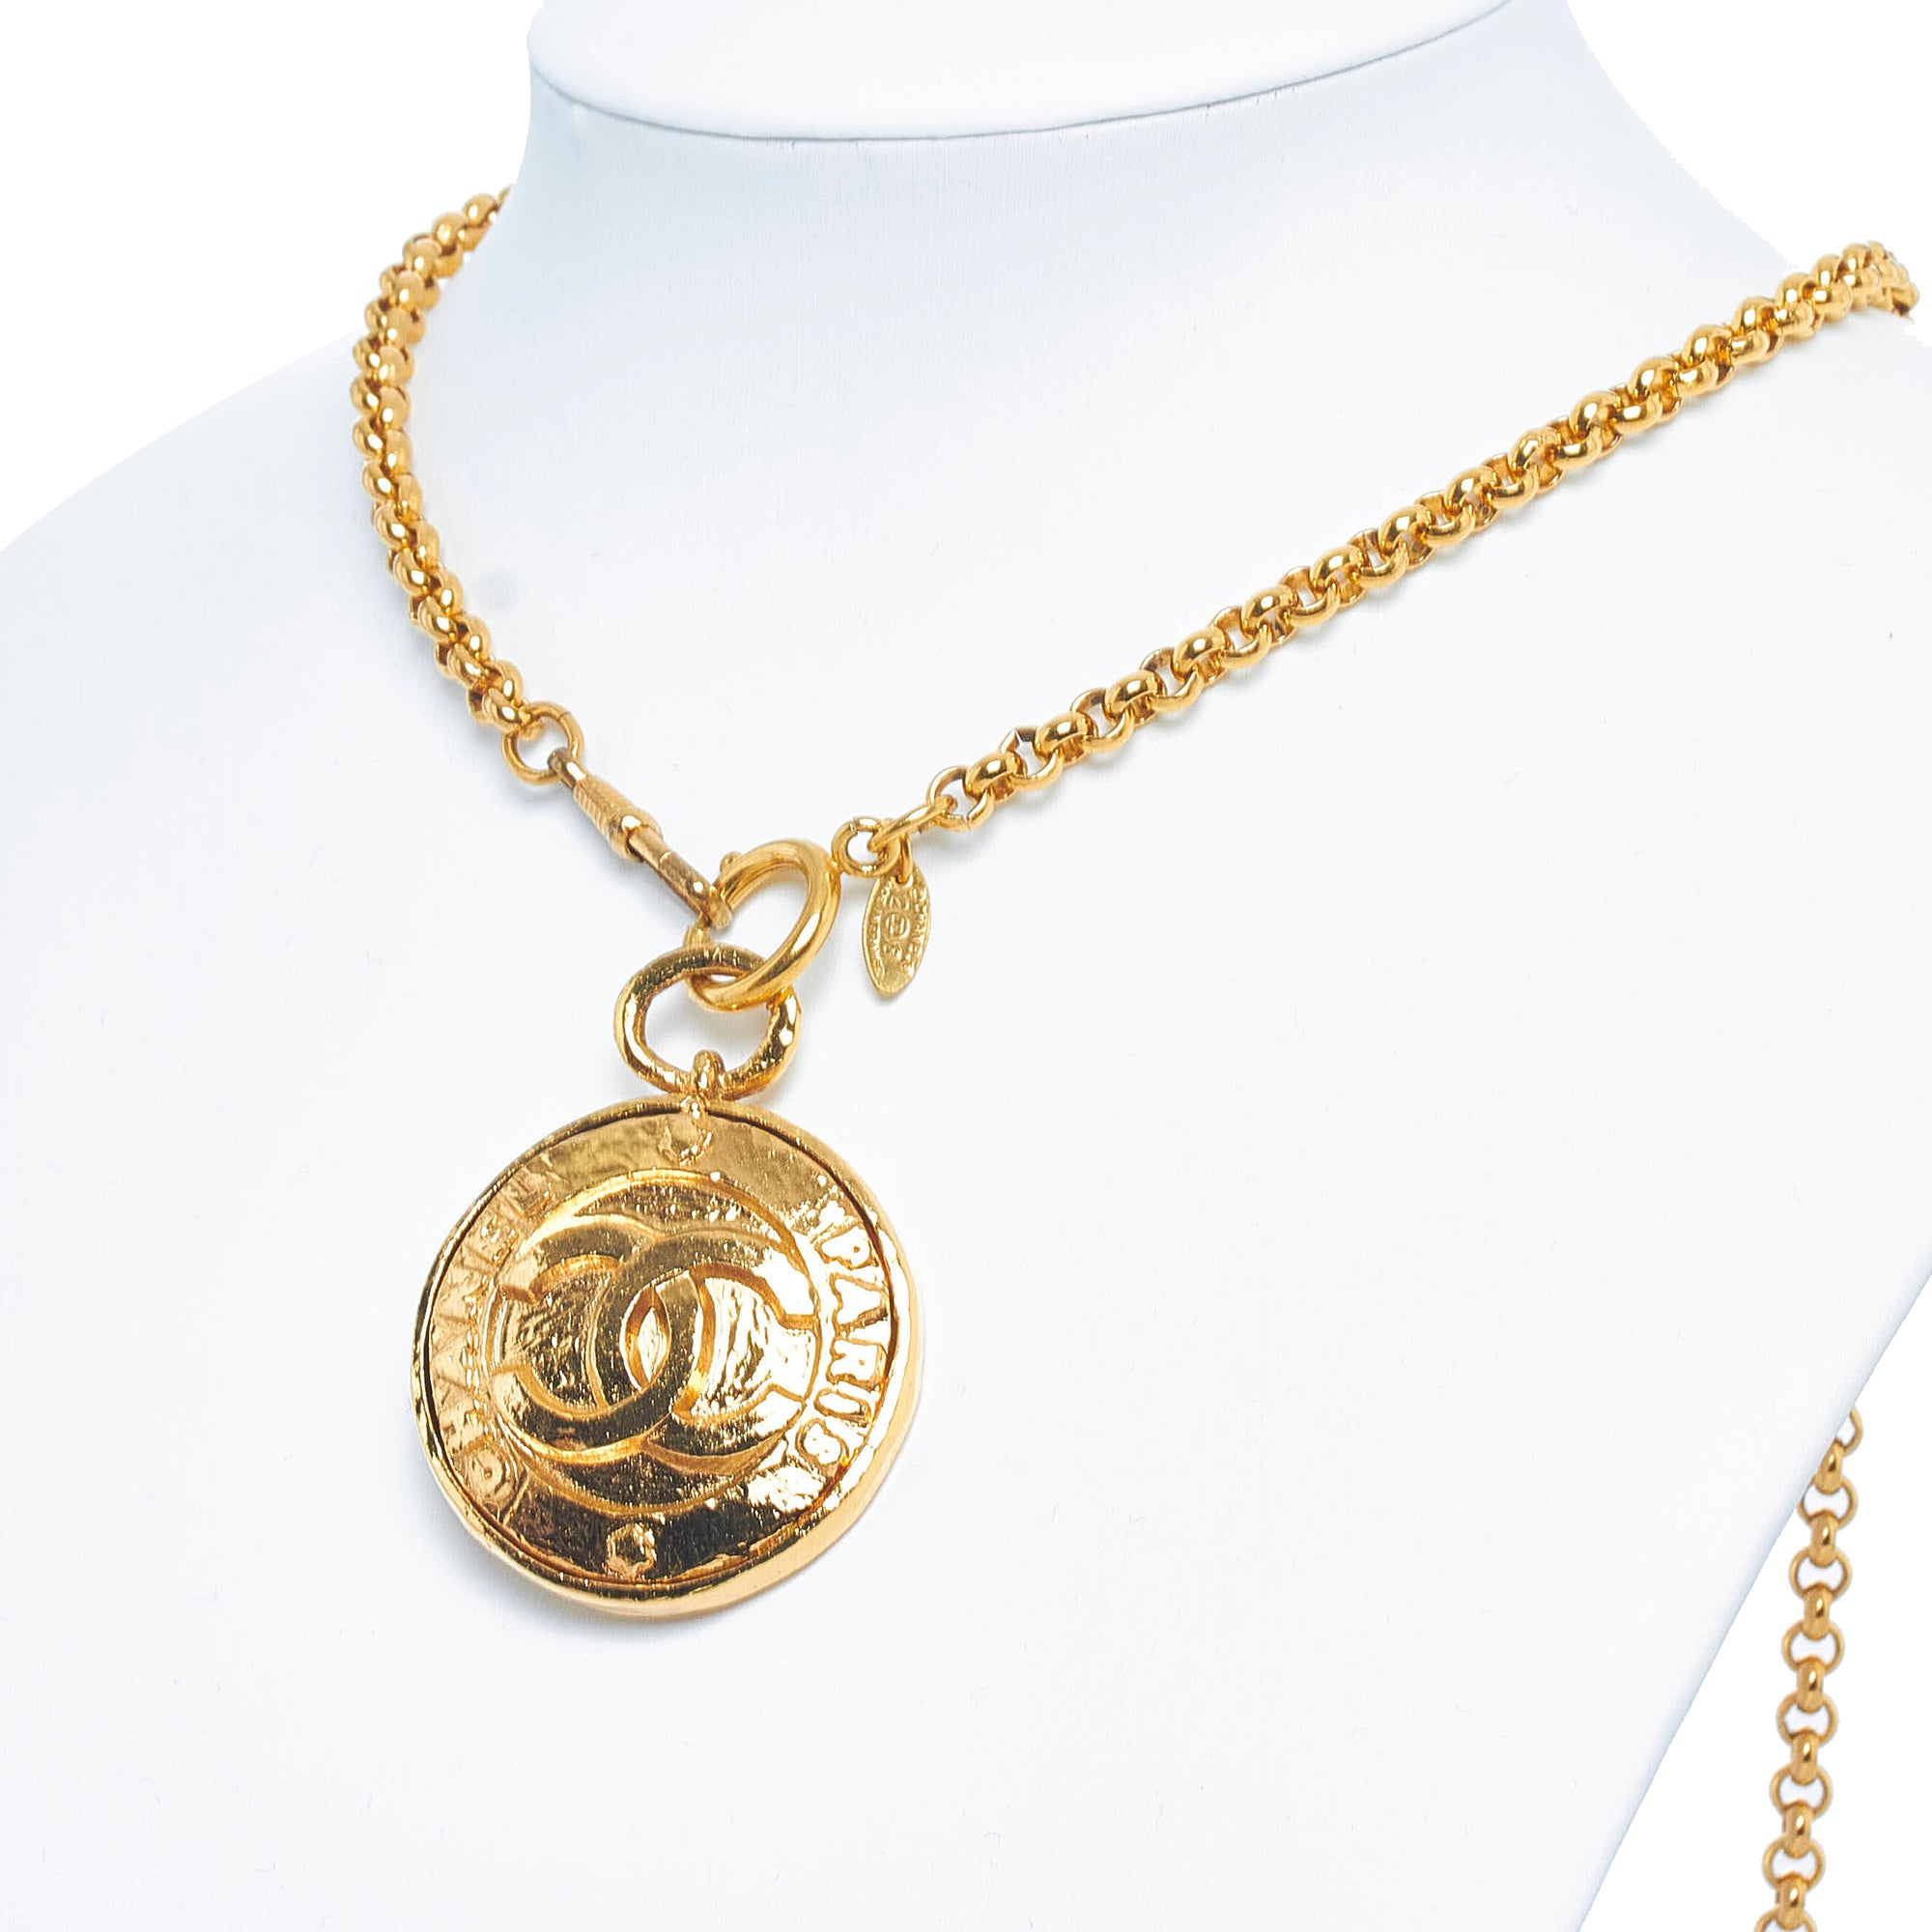 RvceShops Revival, Gold Chanel lift CC Round Medallion Necklace